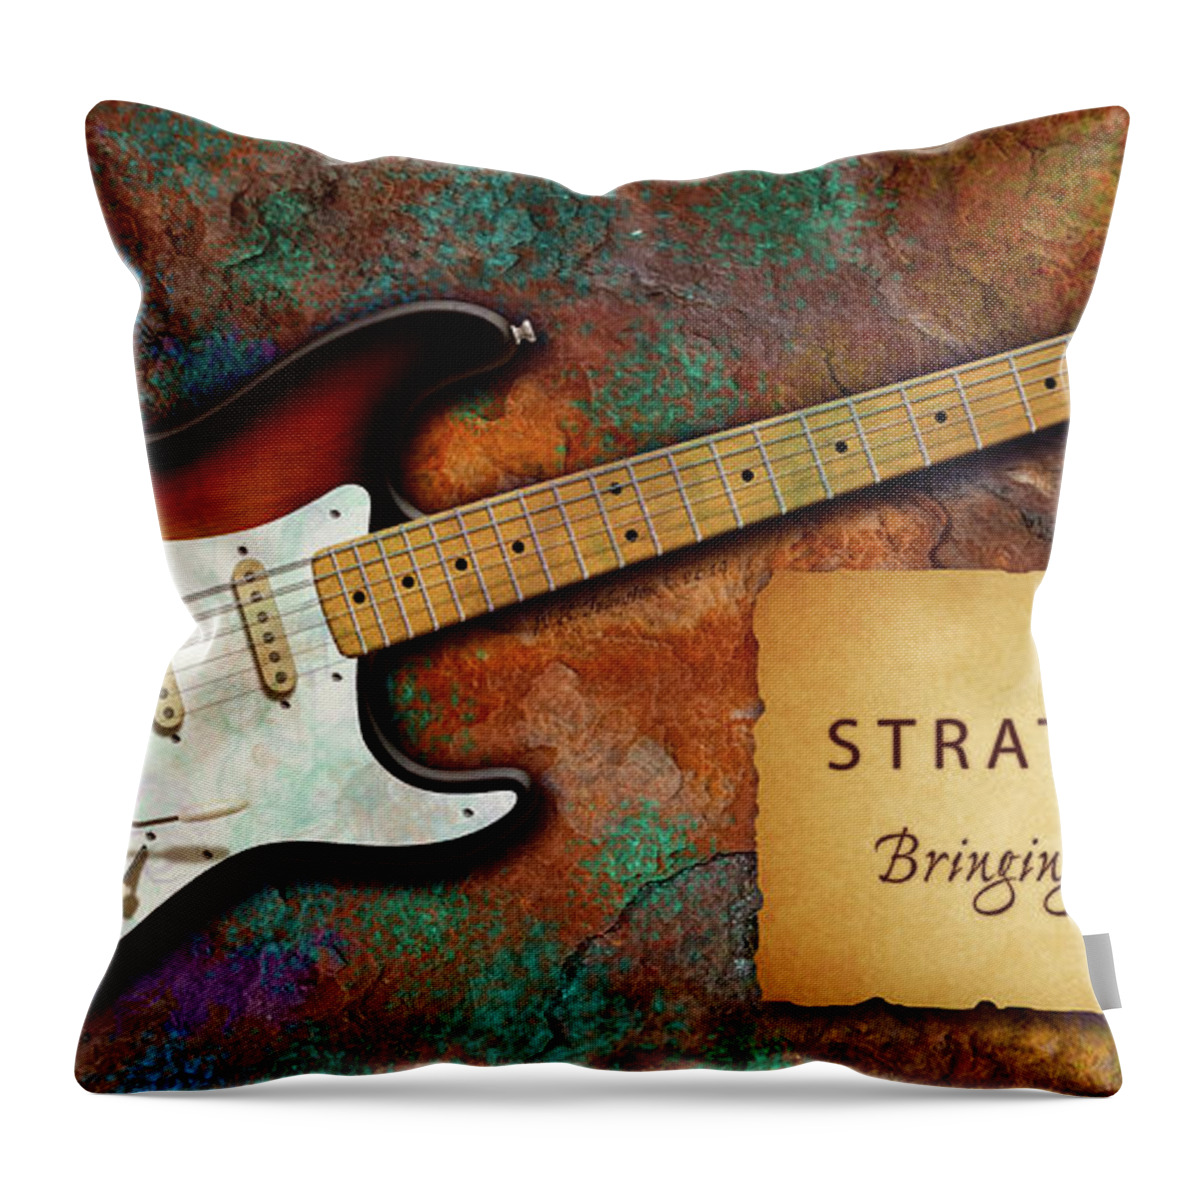 Fender Stratocaster Throw Pillow featuring the digital art Since 1954 by WB Johnston